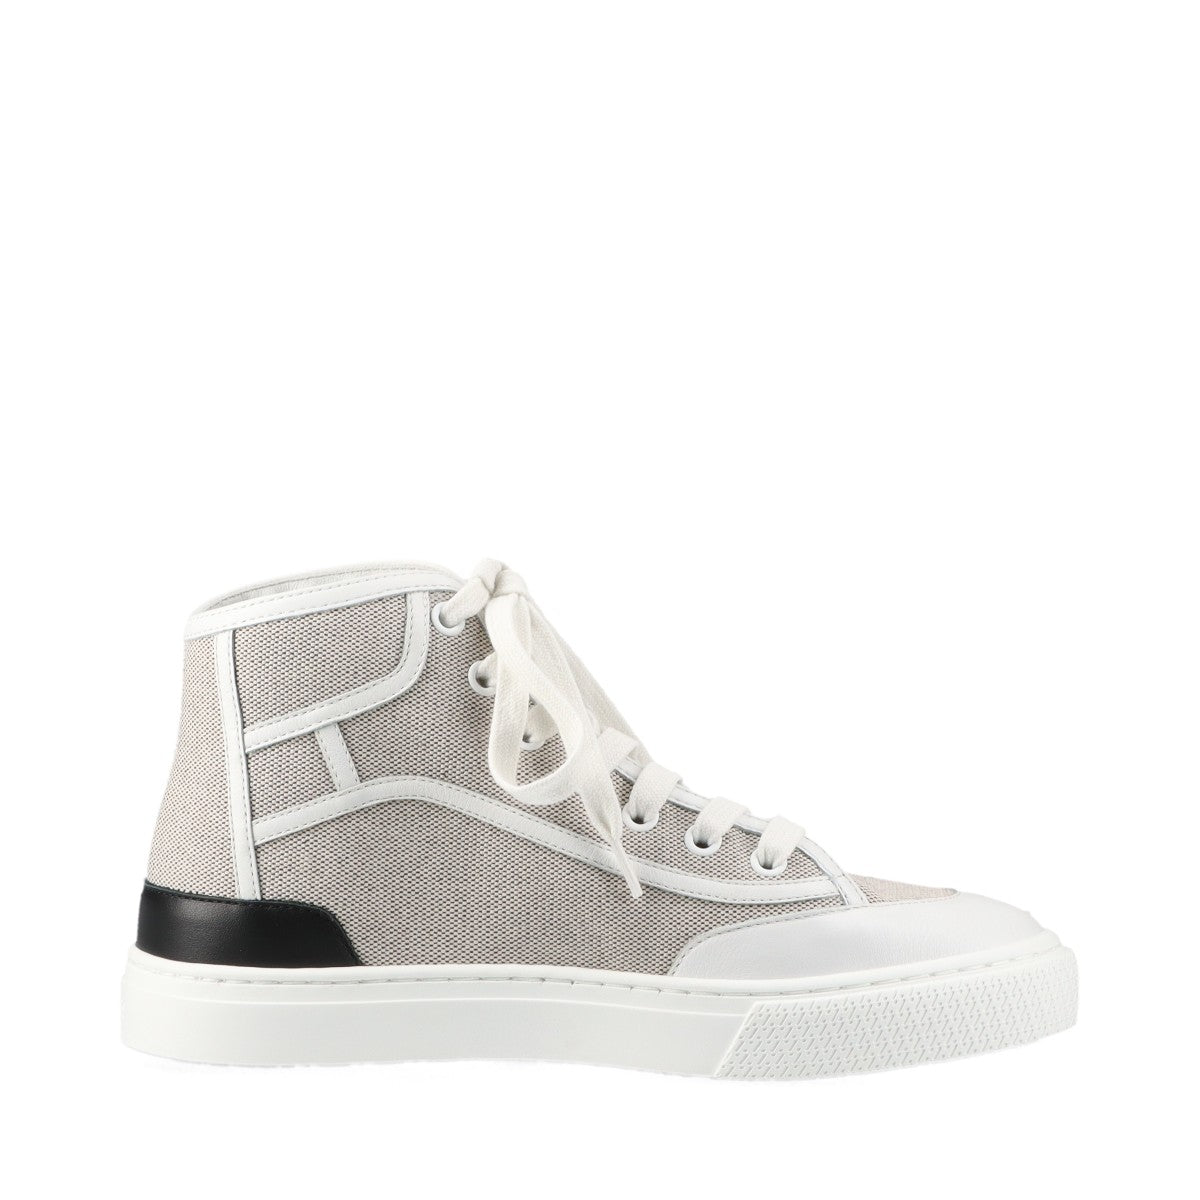 Hermès Get it up Canvas & leather High-top Sneakers EU35 Ladies' White x brown There is a bag